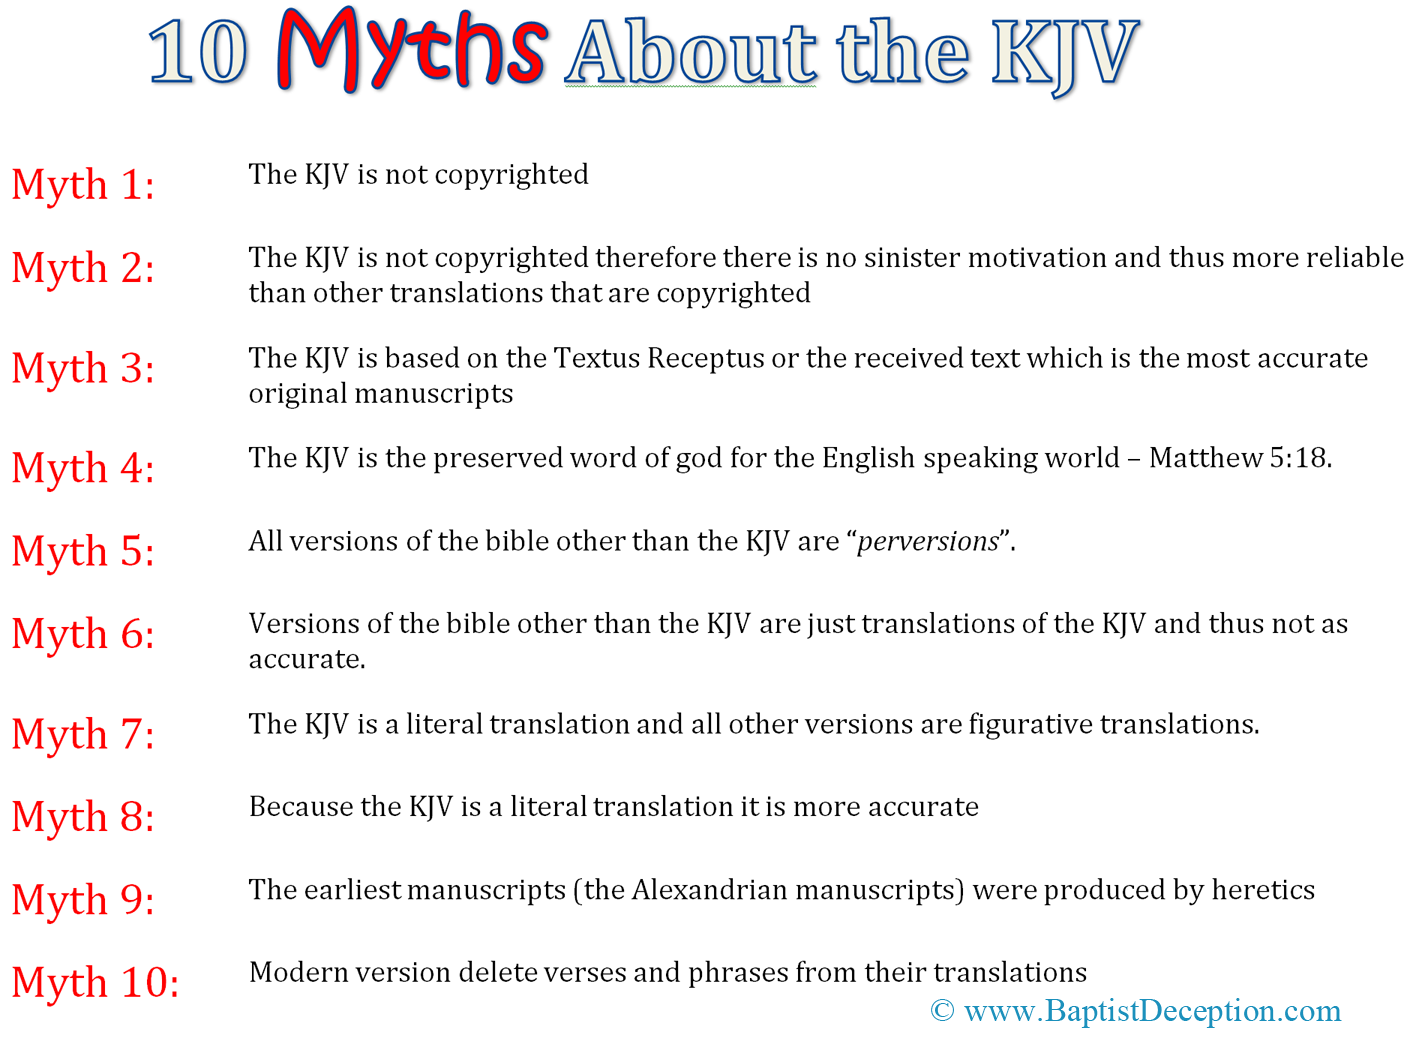 10 Myths About the King James Version